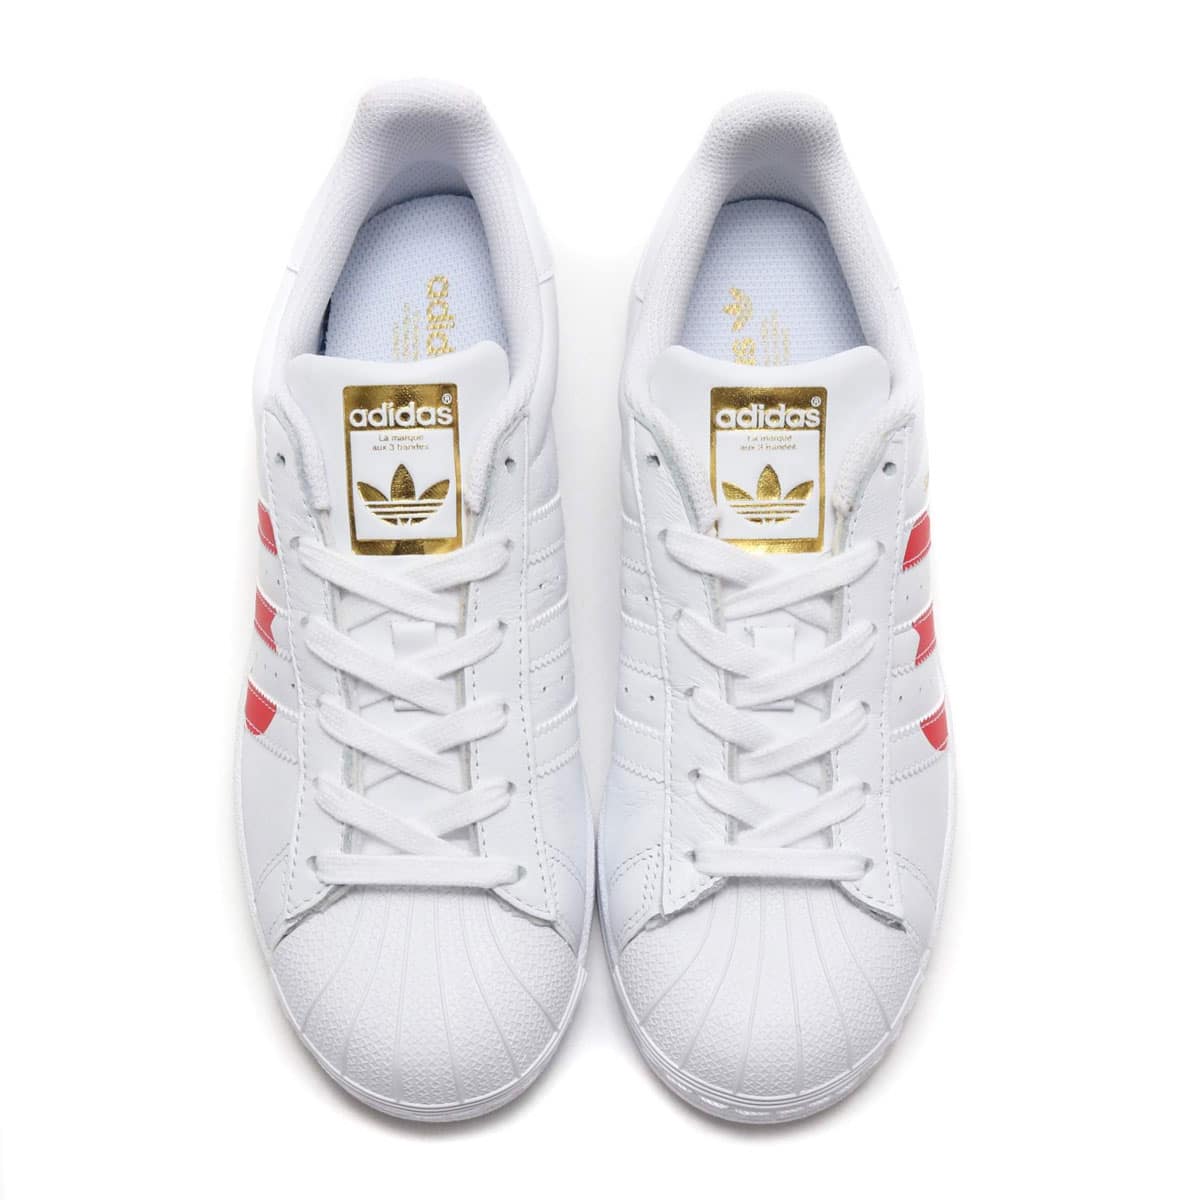 adidas eg3396 buy clothes shoes online